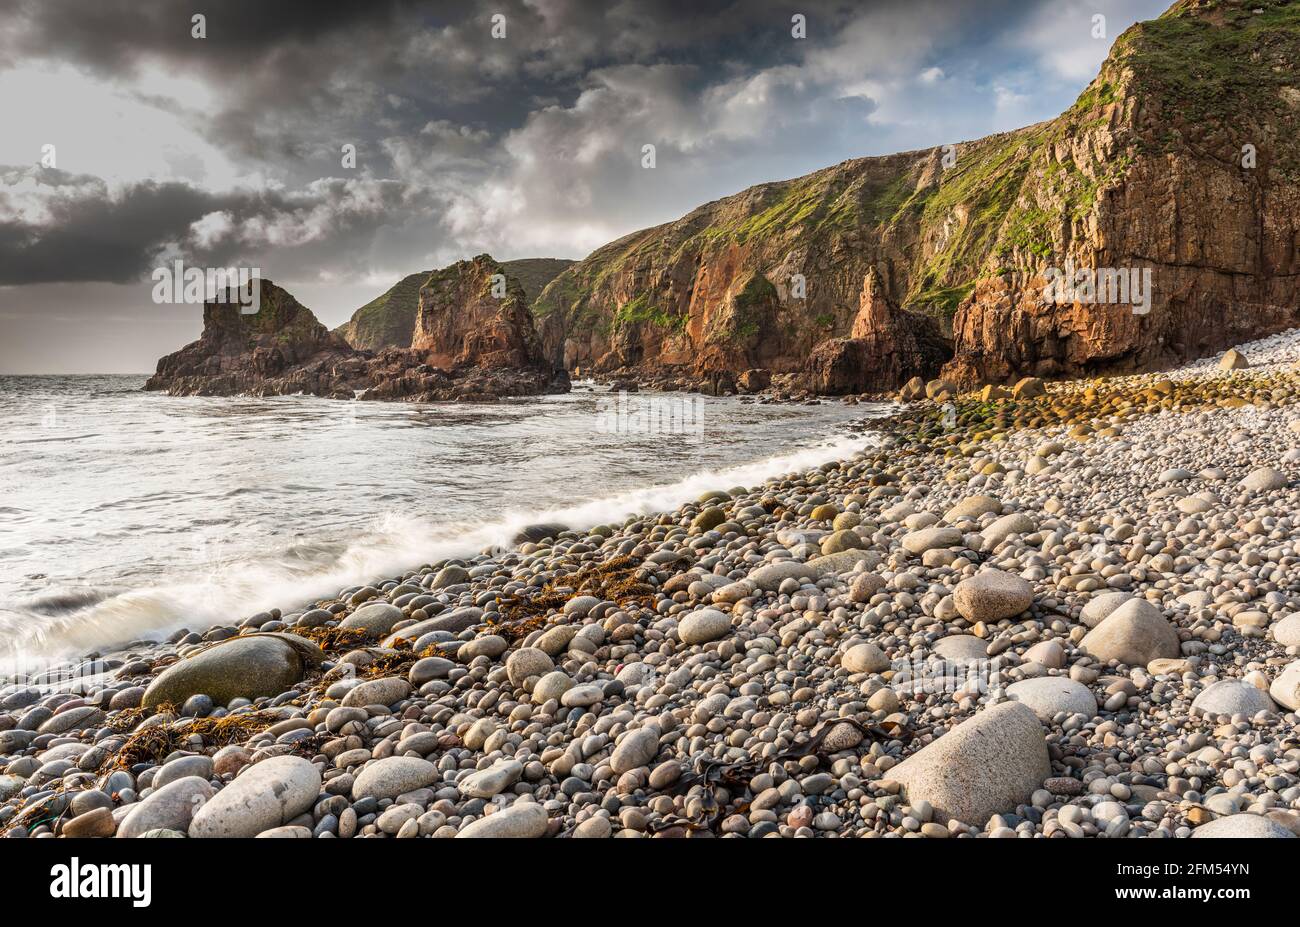 Shingle beach surrounded by rocky cliffs and sea stacks in a bay near Bloody Foreland, County Donegal, Ireland Stock Photo